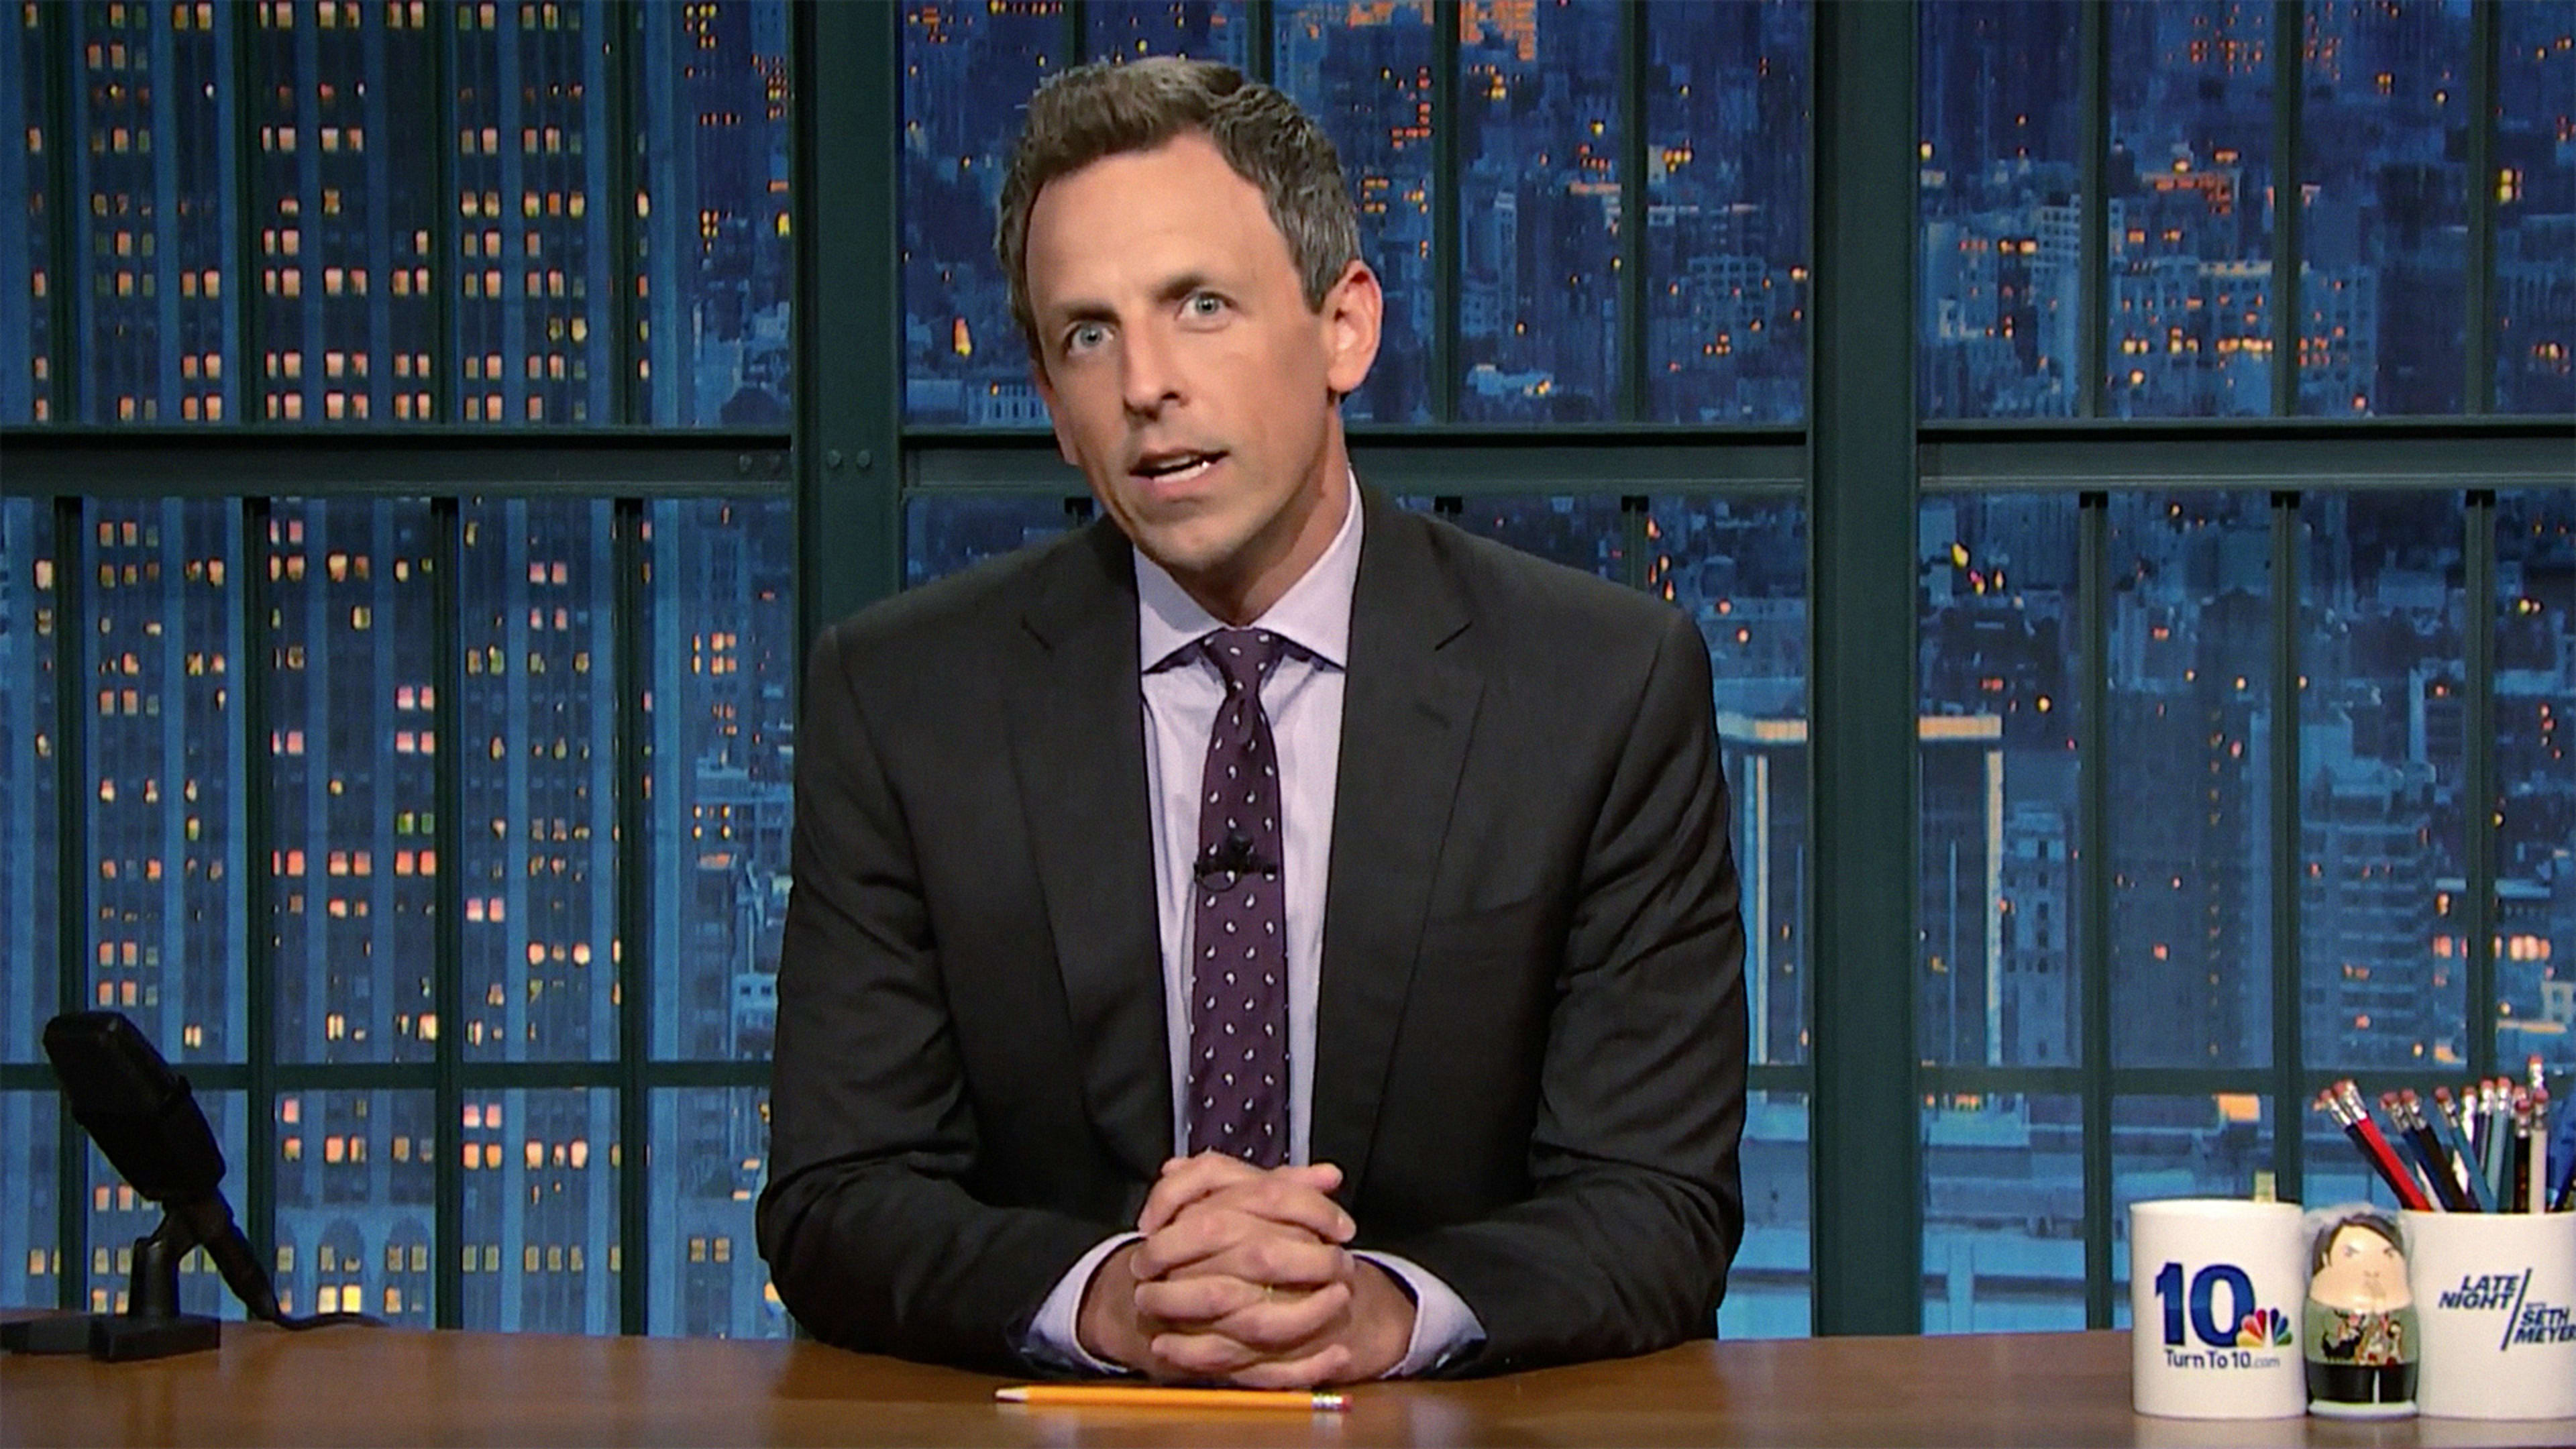 “He is not a president.” Seth Meyers gets serious about Trump and Charlottesville